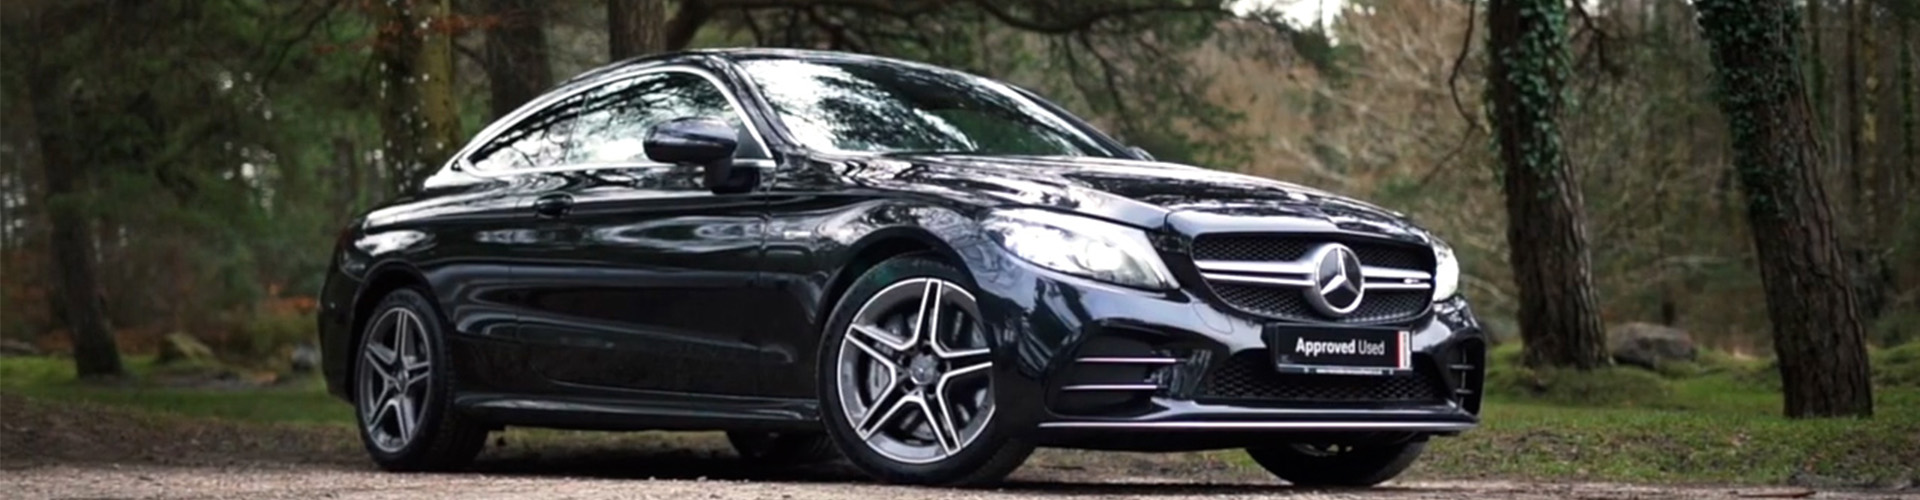 Approved Used Mercedes-AMG C 43